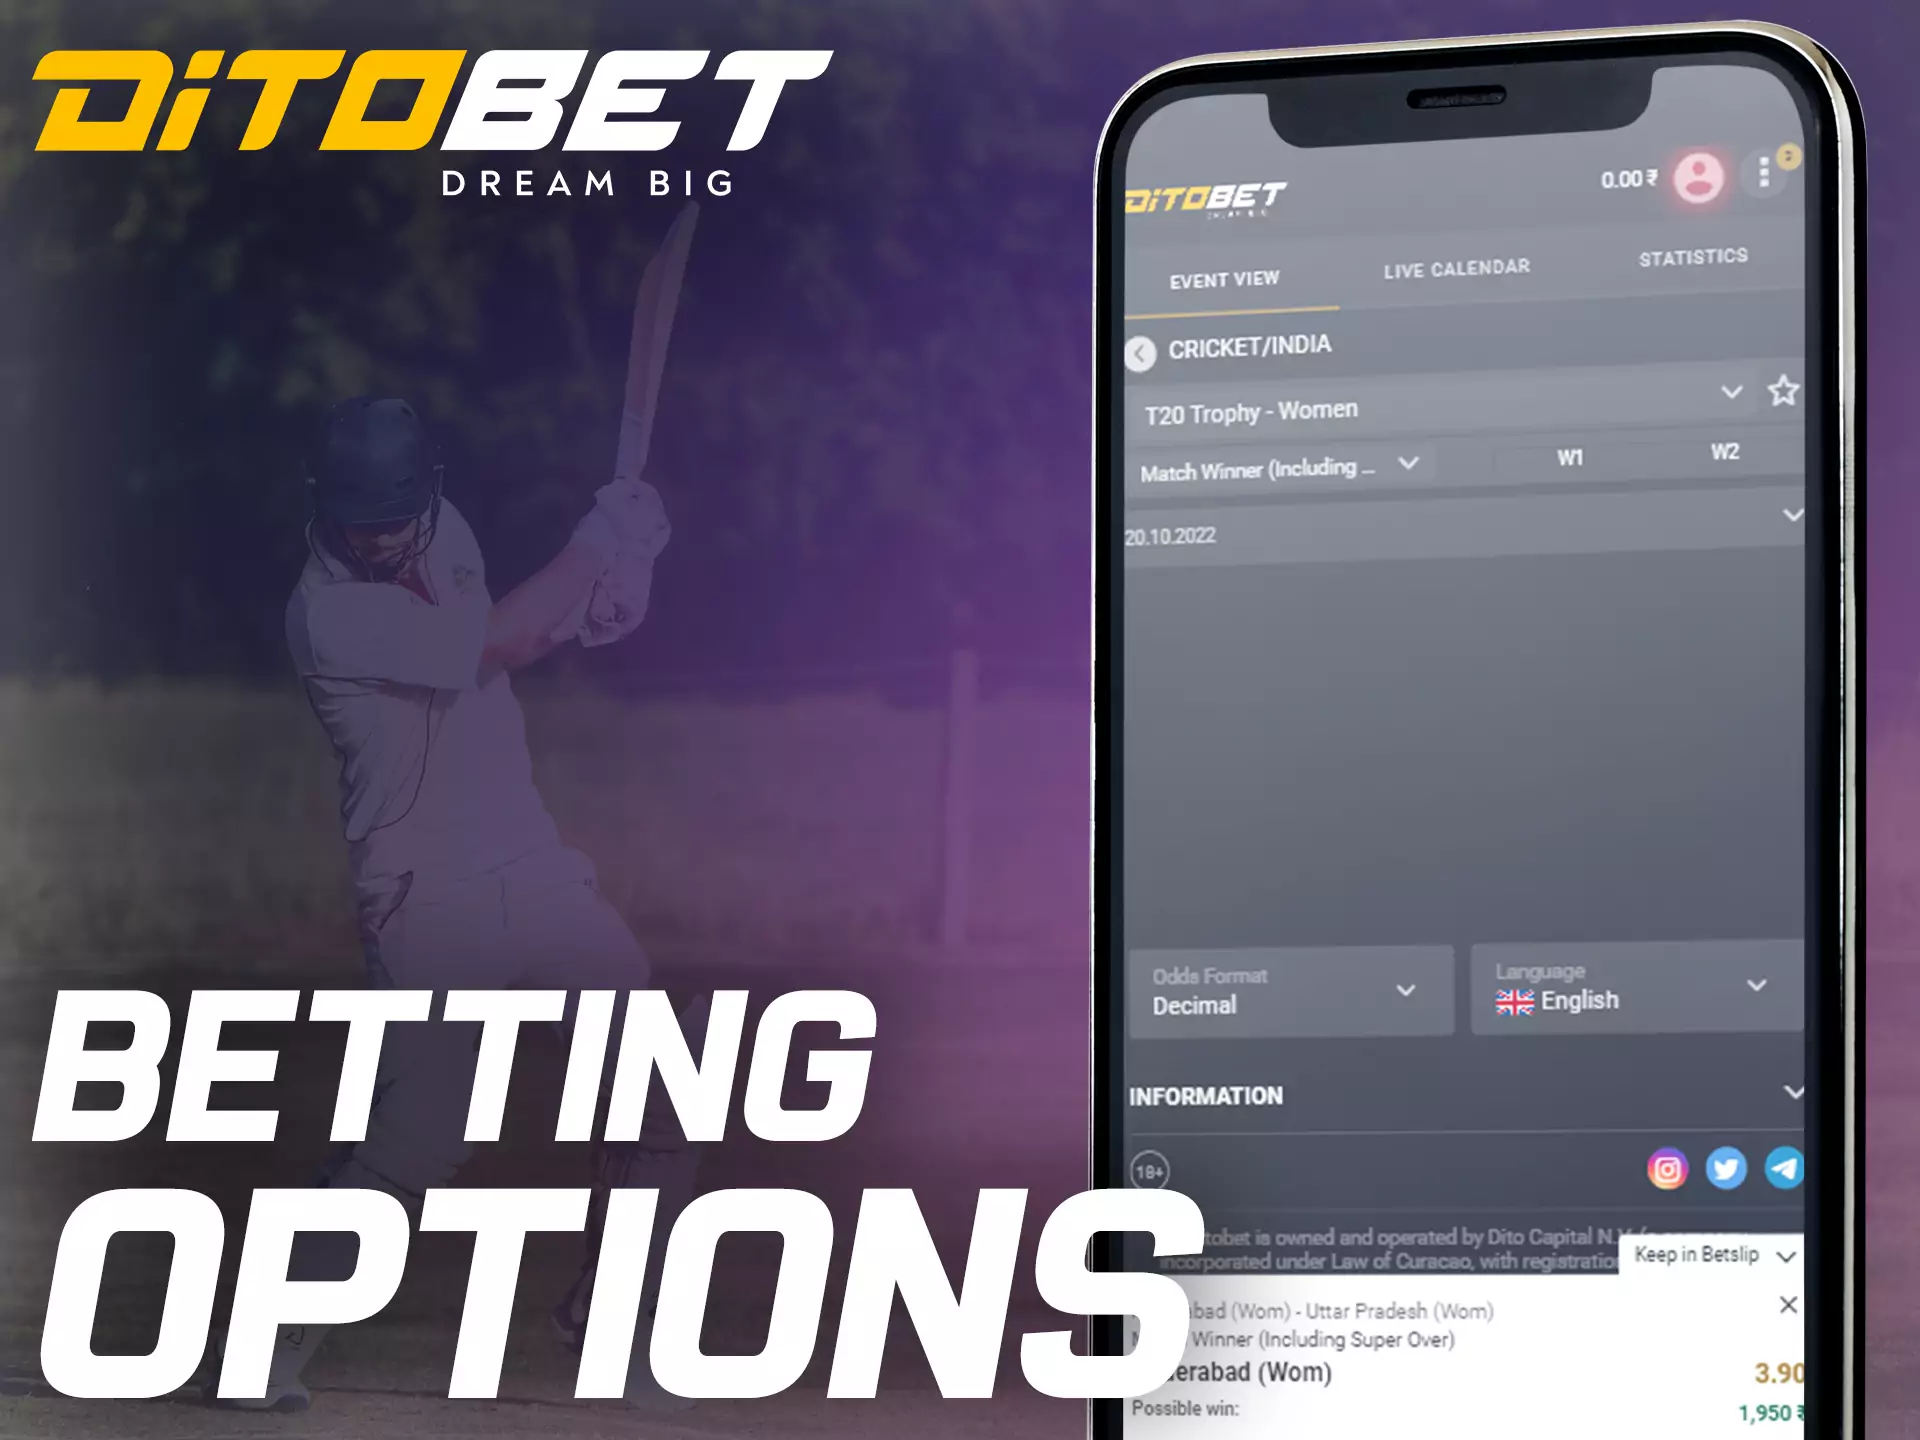 Ditobet offers various sports betting options.